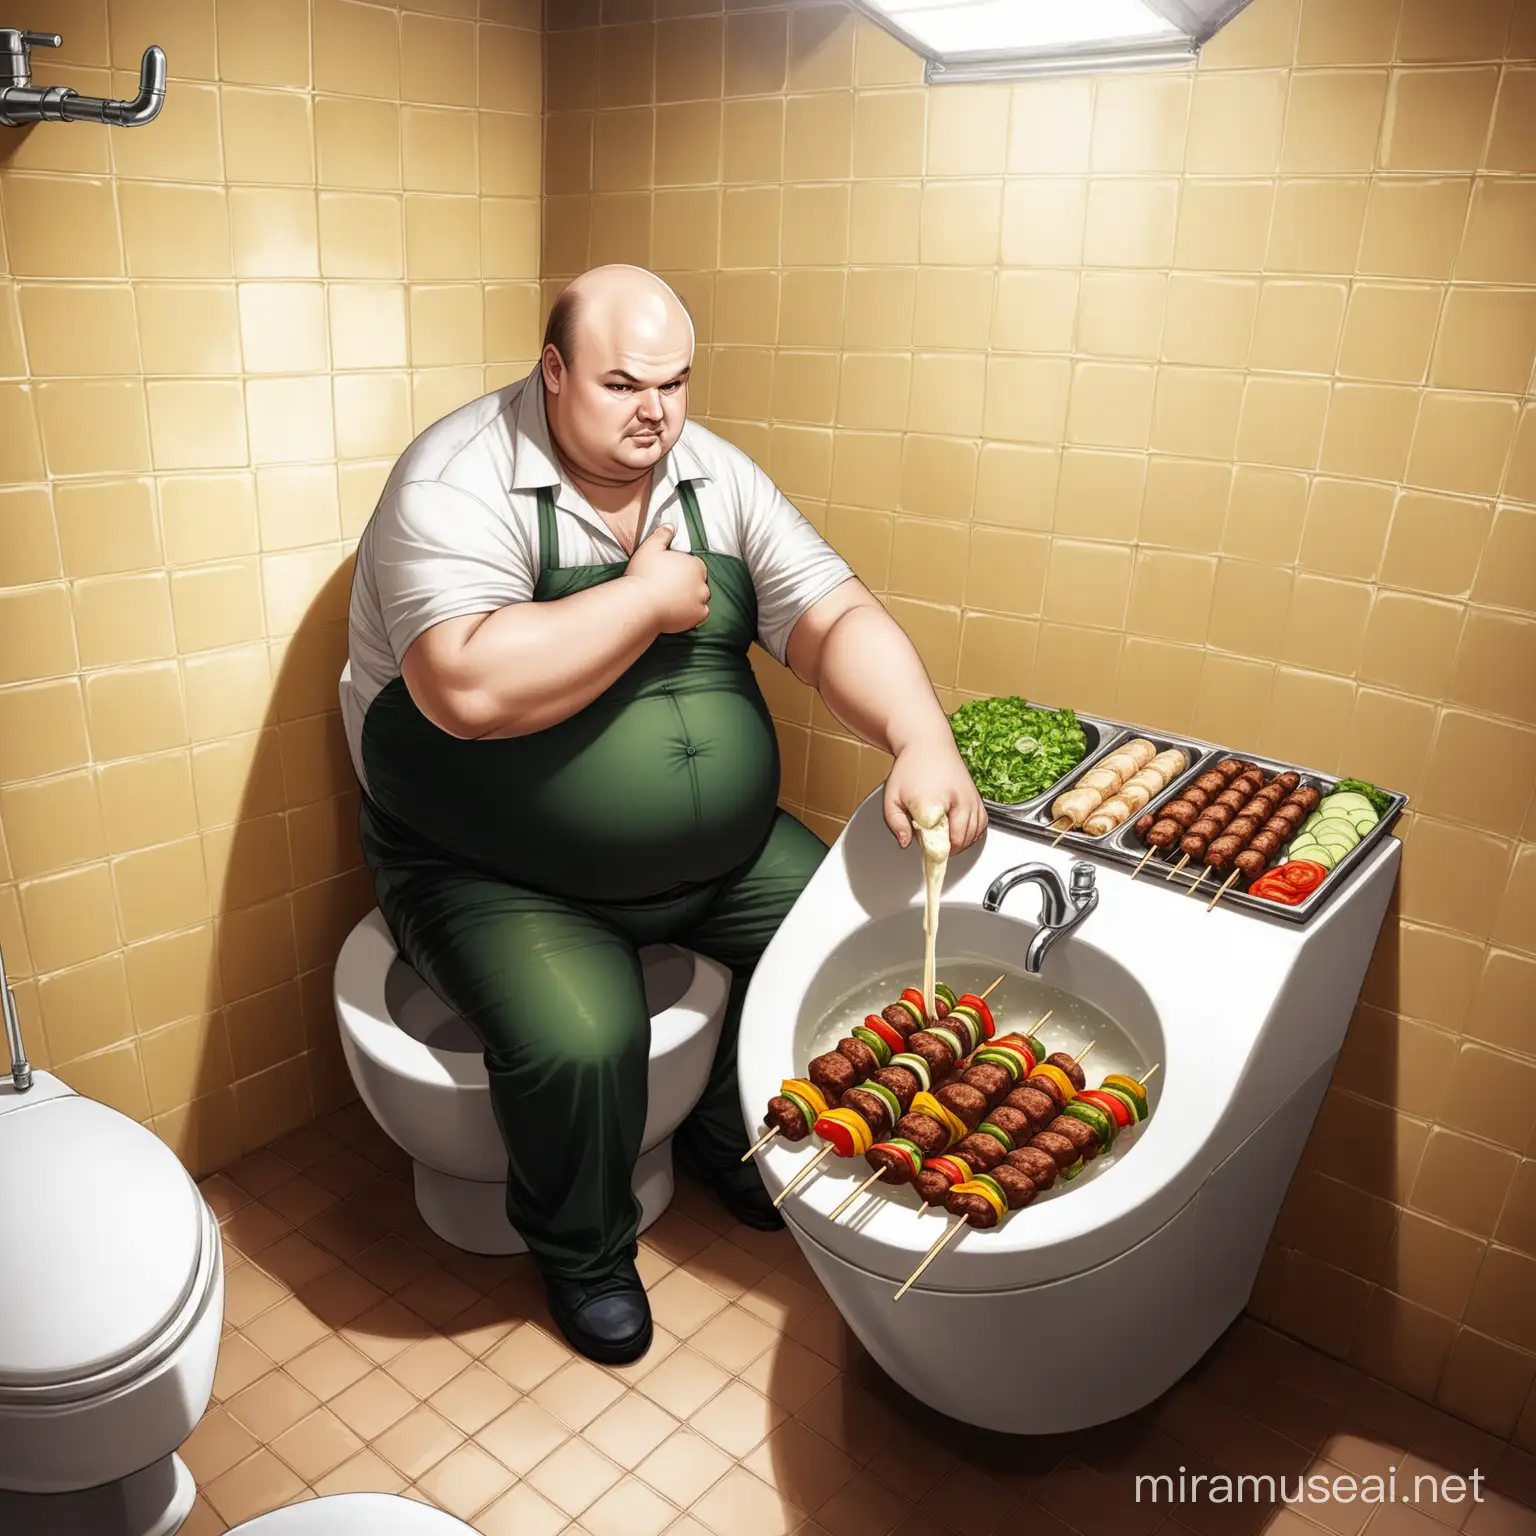 balding, overweight slavic man, selling kebabs at Luko's Kebabs, sitting on toilet and washing vegetables in tap over the cistern